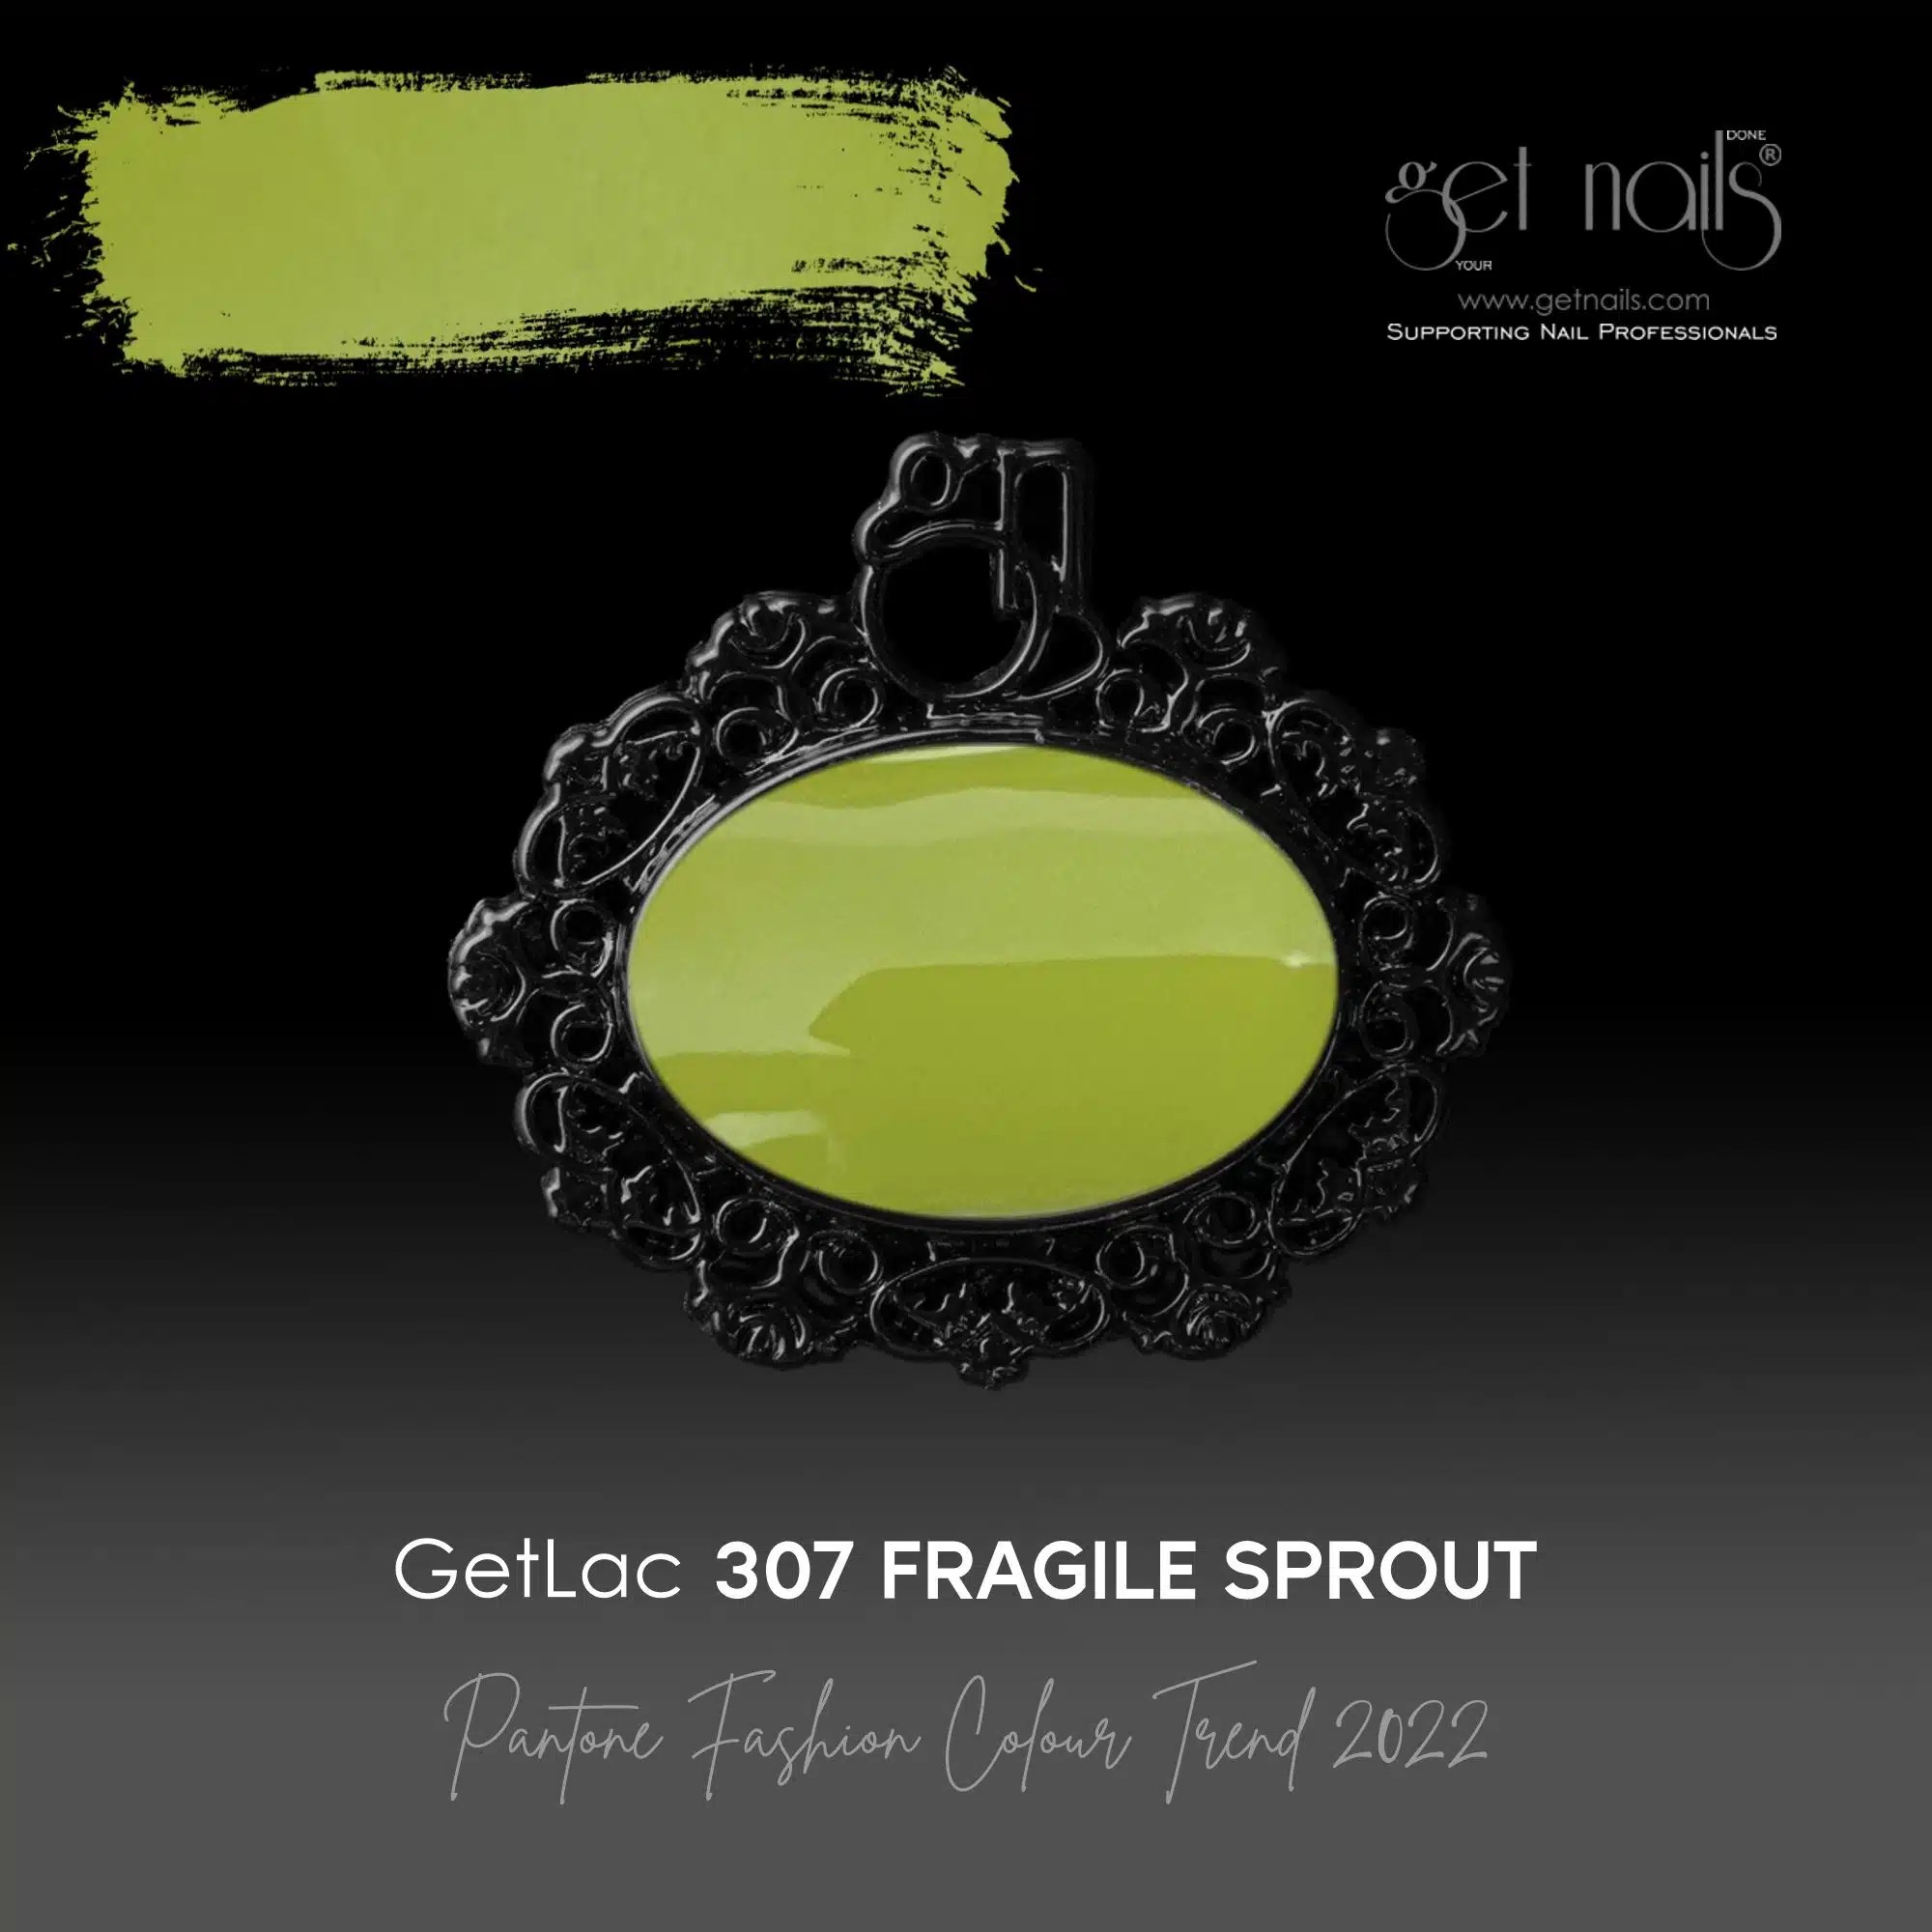 Get Nails Austria - GetLac 307 Fragile Sprout 15g